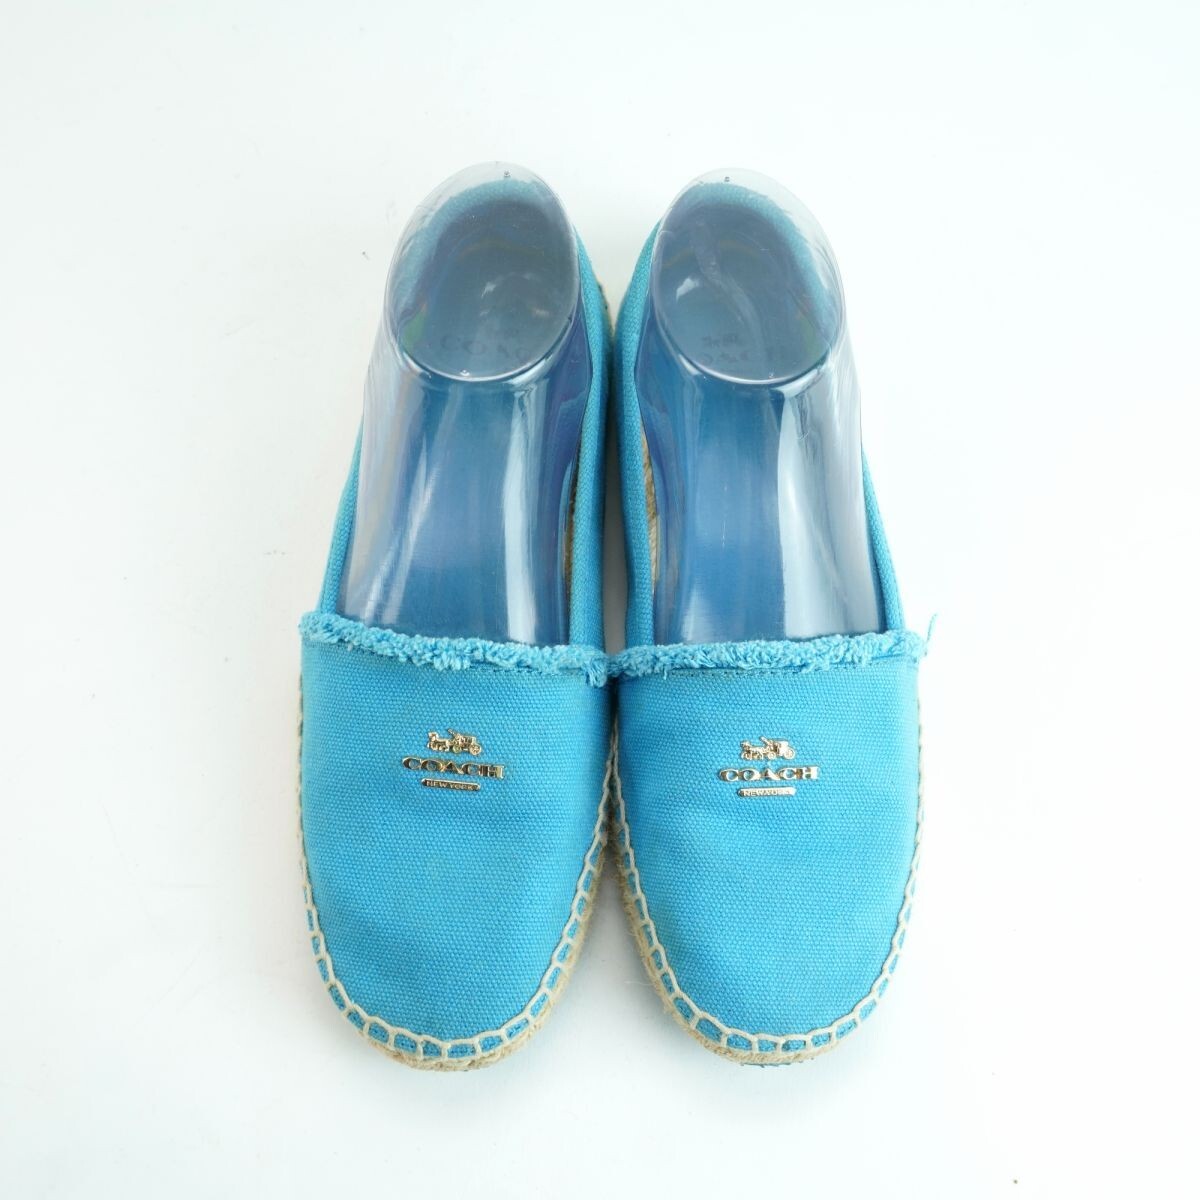 COACH Coach 23.5 slip-on shoes flat shoes brand Logo Gold metal fittings canvas ground blue blue /NC27